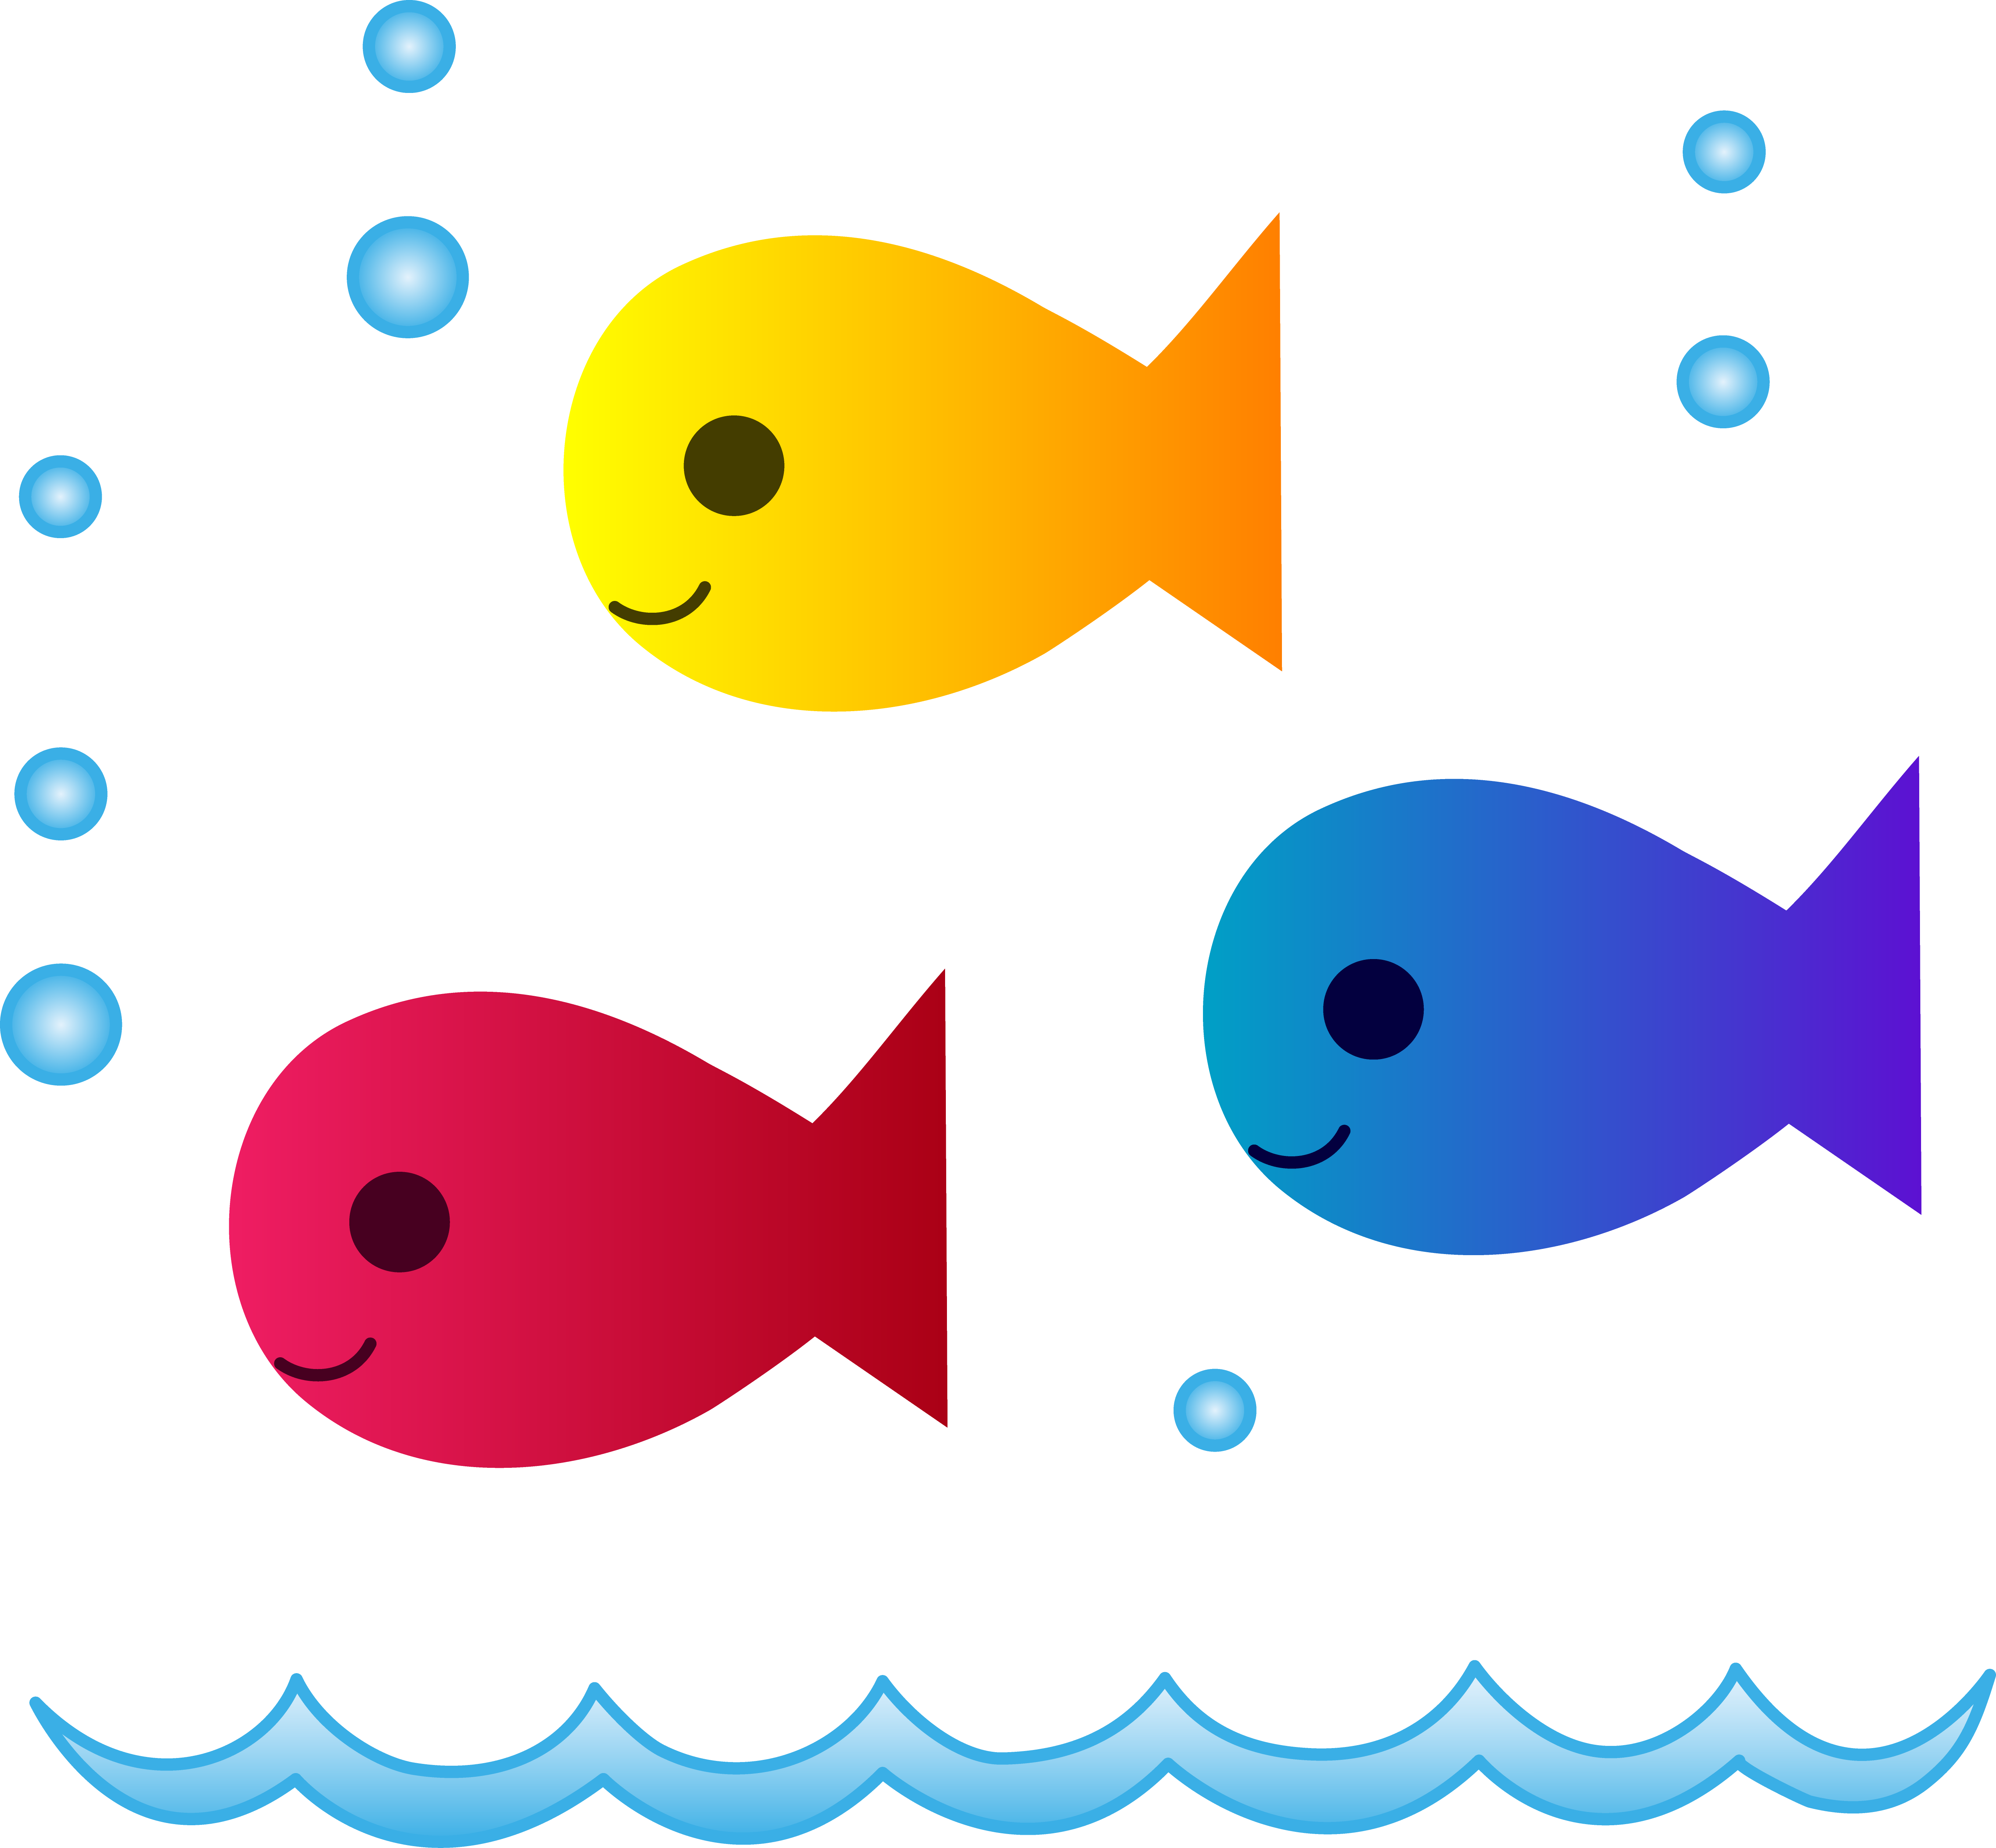 Free School Of Fish Clipart, Download Free Clip Art, Free.